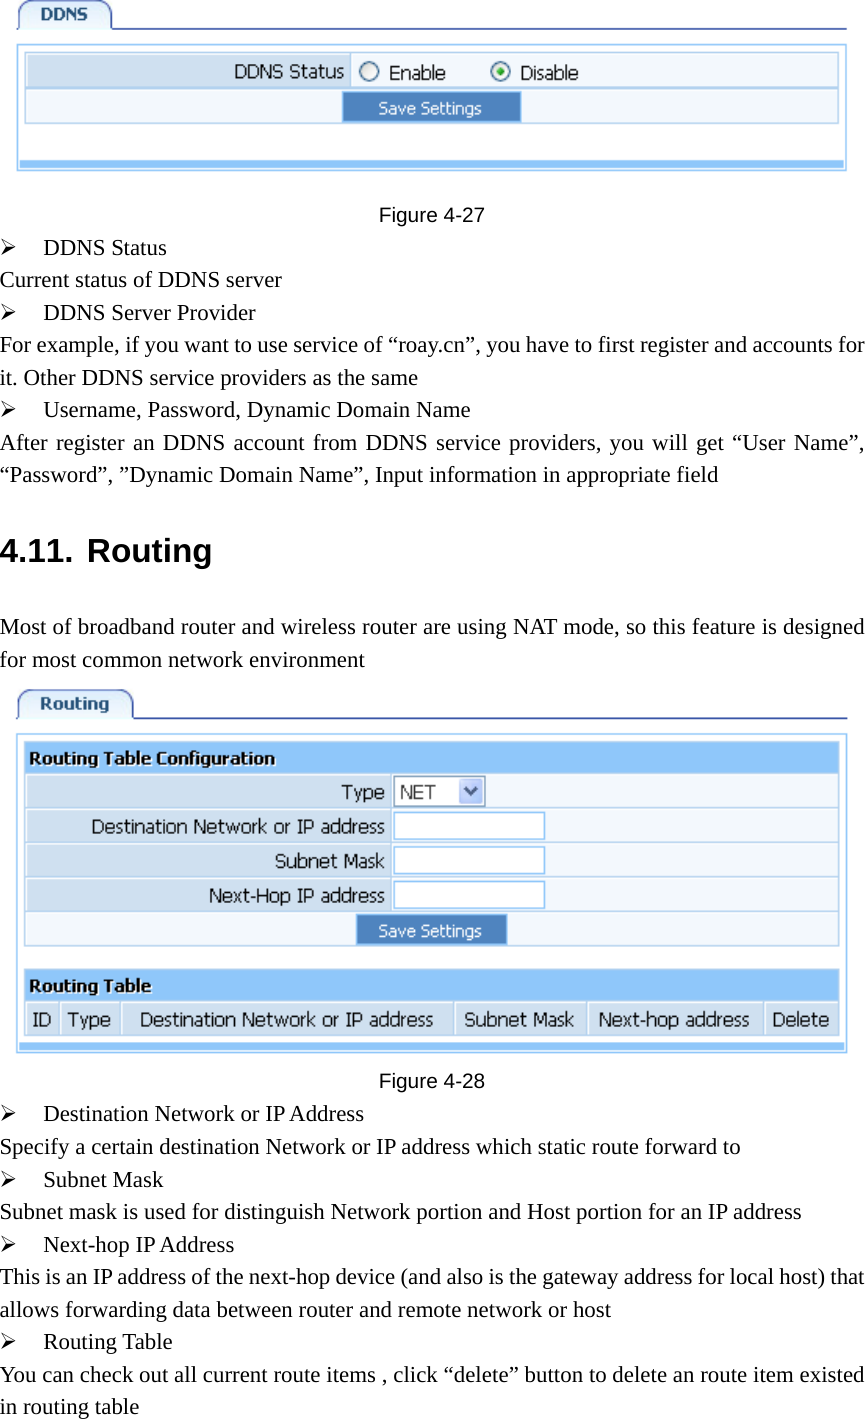  Figure  4-27 ¾ DDNS Status  Current status of DDNS server ¾ DDNS Server Provider For example, if you want to use service of “roay.cn”, you have to first register and accounts for it. Other DDNS service providers as the same ¾ Username, Password, Dynamic Domain Name After register an DDNS account from DDNS service providers, you will get “User Name”, “Password”, ”Dynamic Domain Name”, Input information in appropriate field 4.11. Routing Most of broadband router and wireless router are using NAT mode, so this feature is designed for most common network environment  Figure  4-28 ¾ Destination Network or IP Address Specify a certain destination Network or IP address which static route forward to ¾ Subnet Mask Subnet mask is used for distinguish Network portion and Host portion for an IP address ¾ Next-hop IP Address This is an IP address of the next-hop device (and also is the gateway address for local host) that allows forwarding data between router and remote network or host ¾ Routing Table You can check out all current route items , click “delete” button to delete an route item existed in routing table 